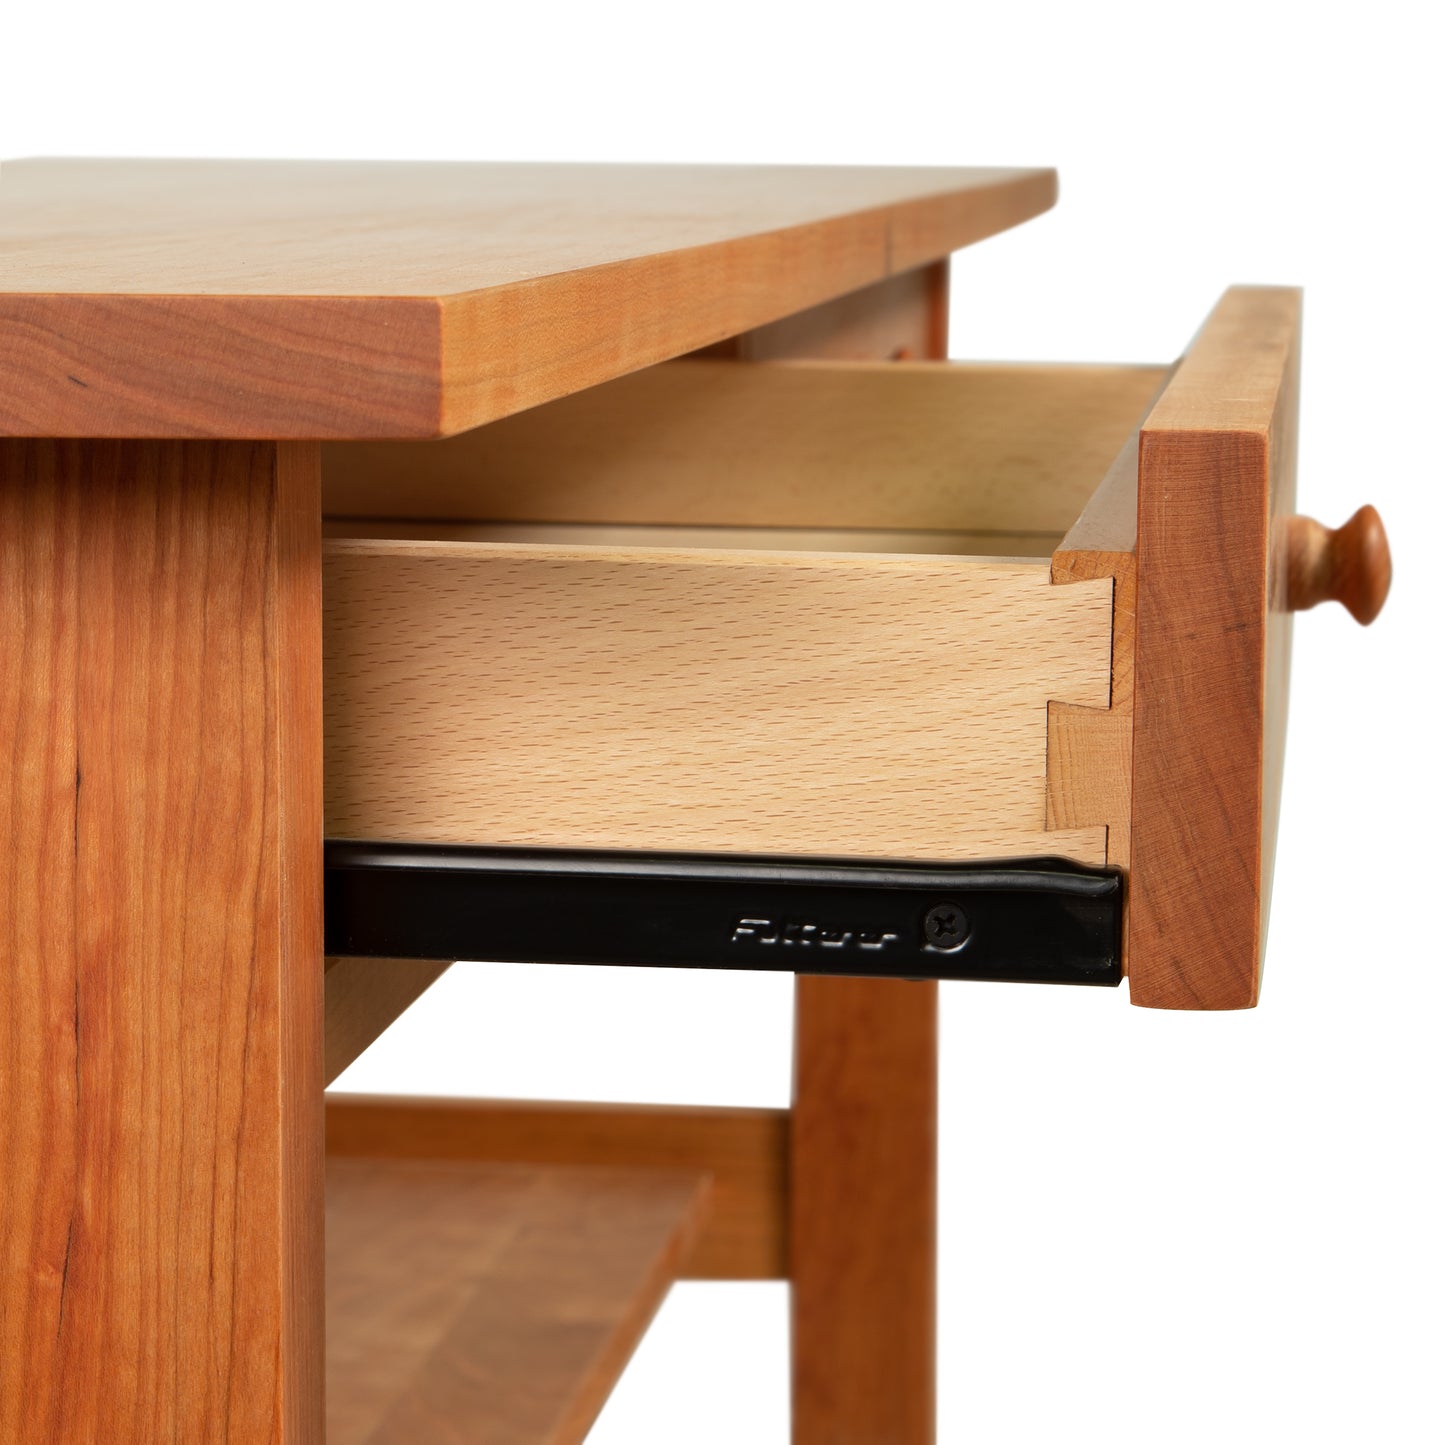 A Vermont Furniture Designs Burlington Shaker 2-Drawer Coffee Table with a drawer under it.